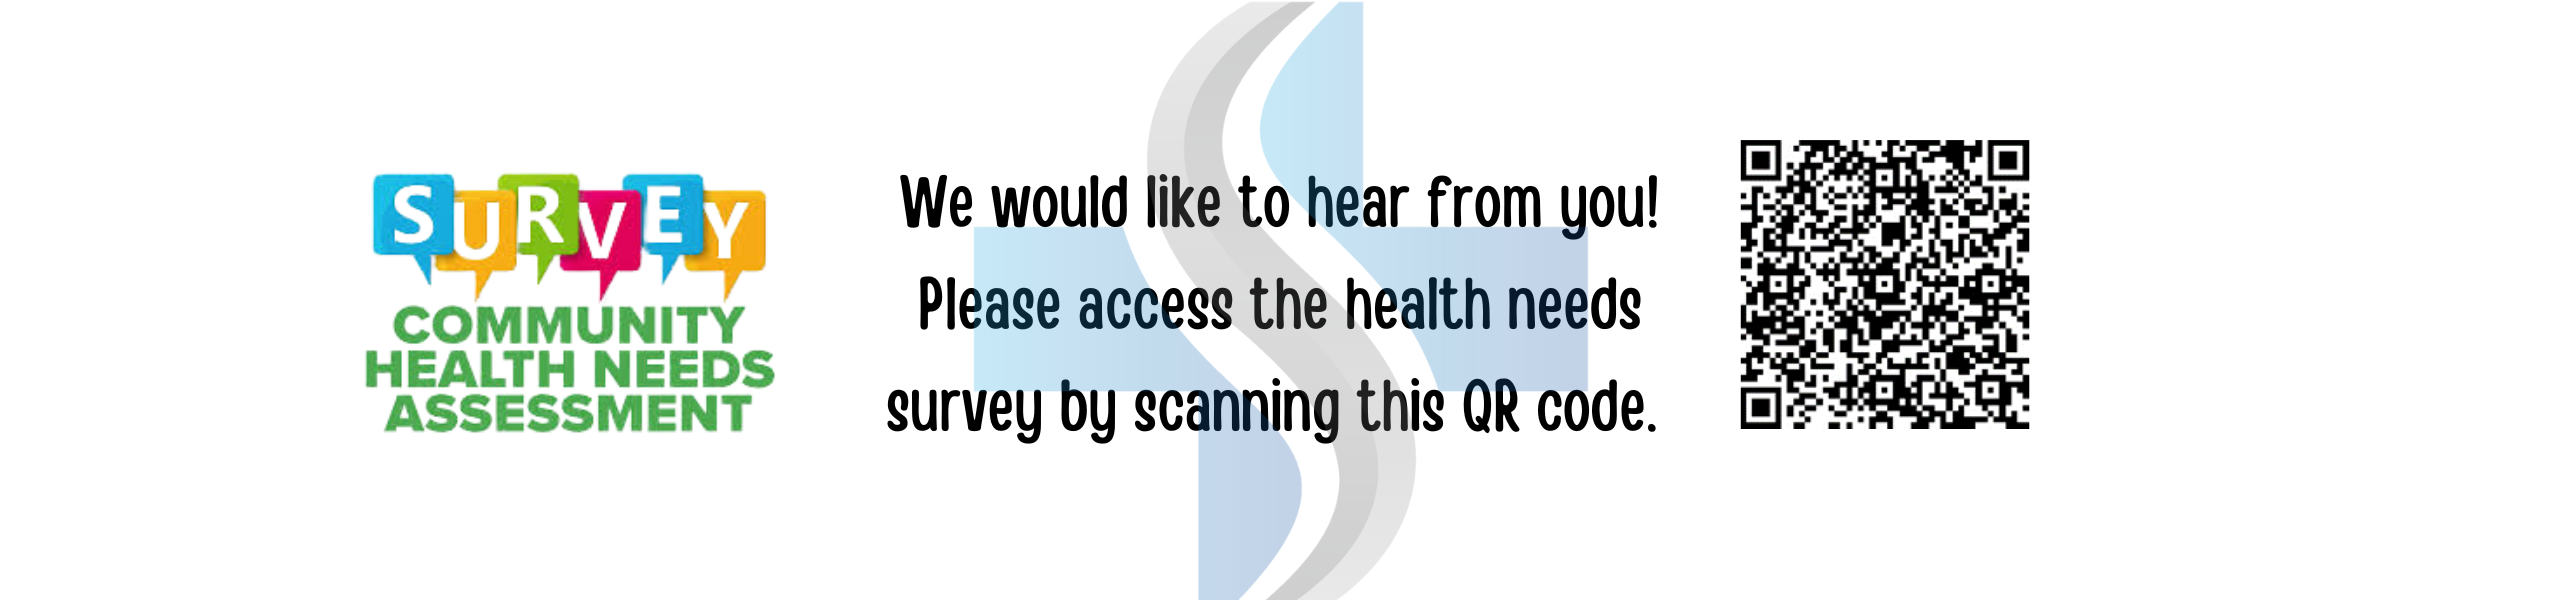 We would like to hear from you!
Please access the health needs surgery by scanning this QR Code.

Community Health Needs Assessment